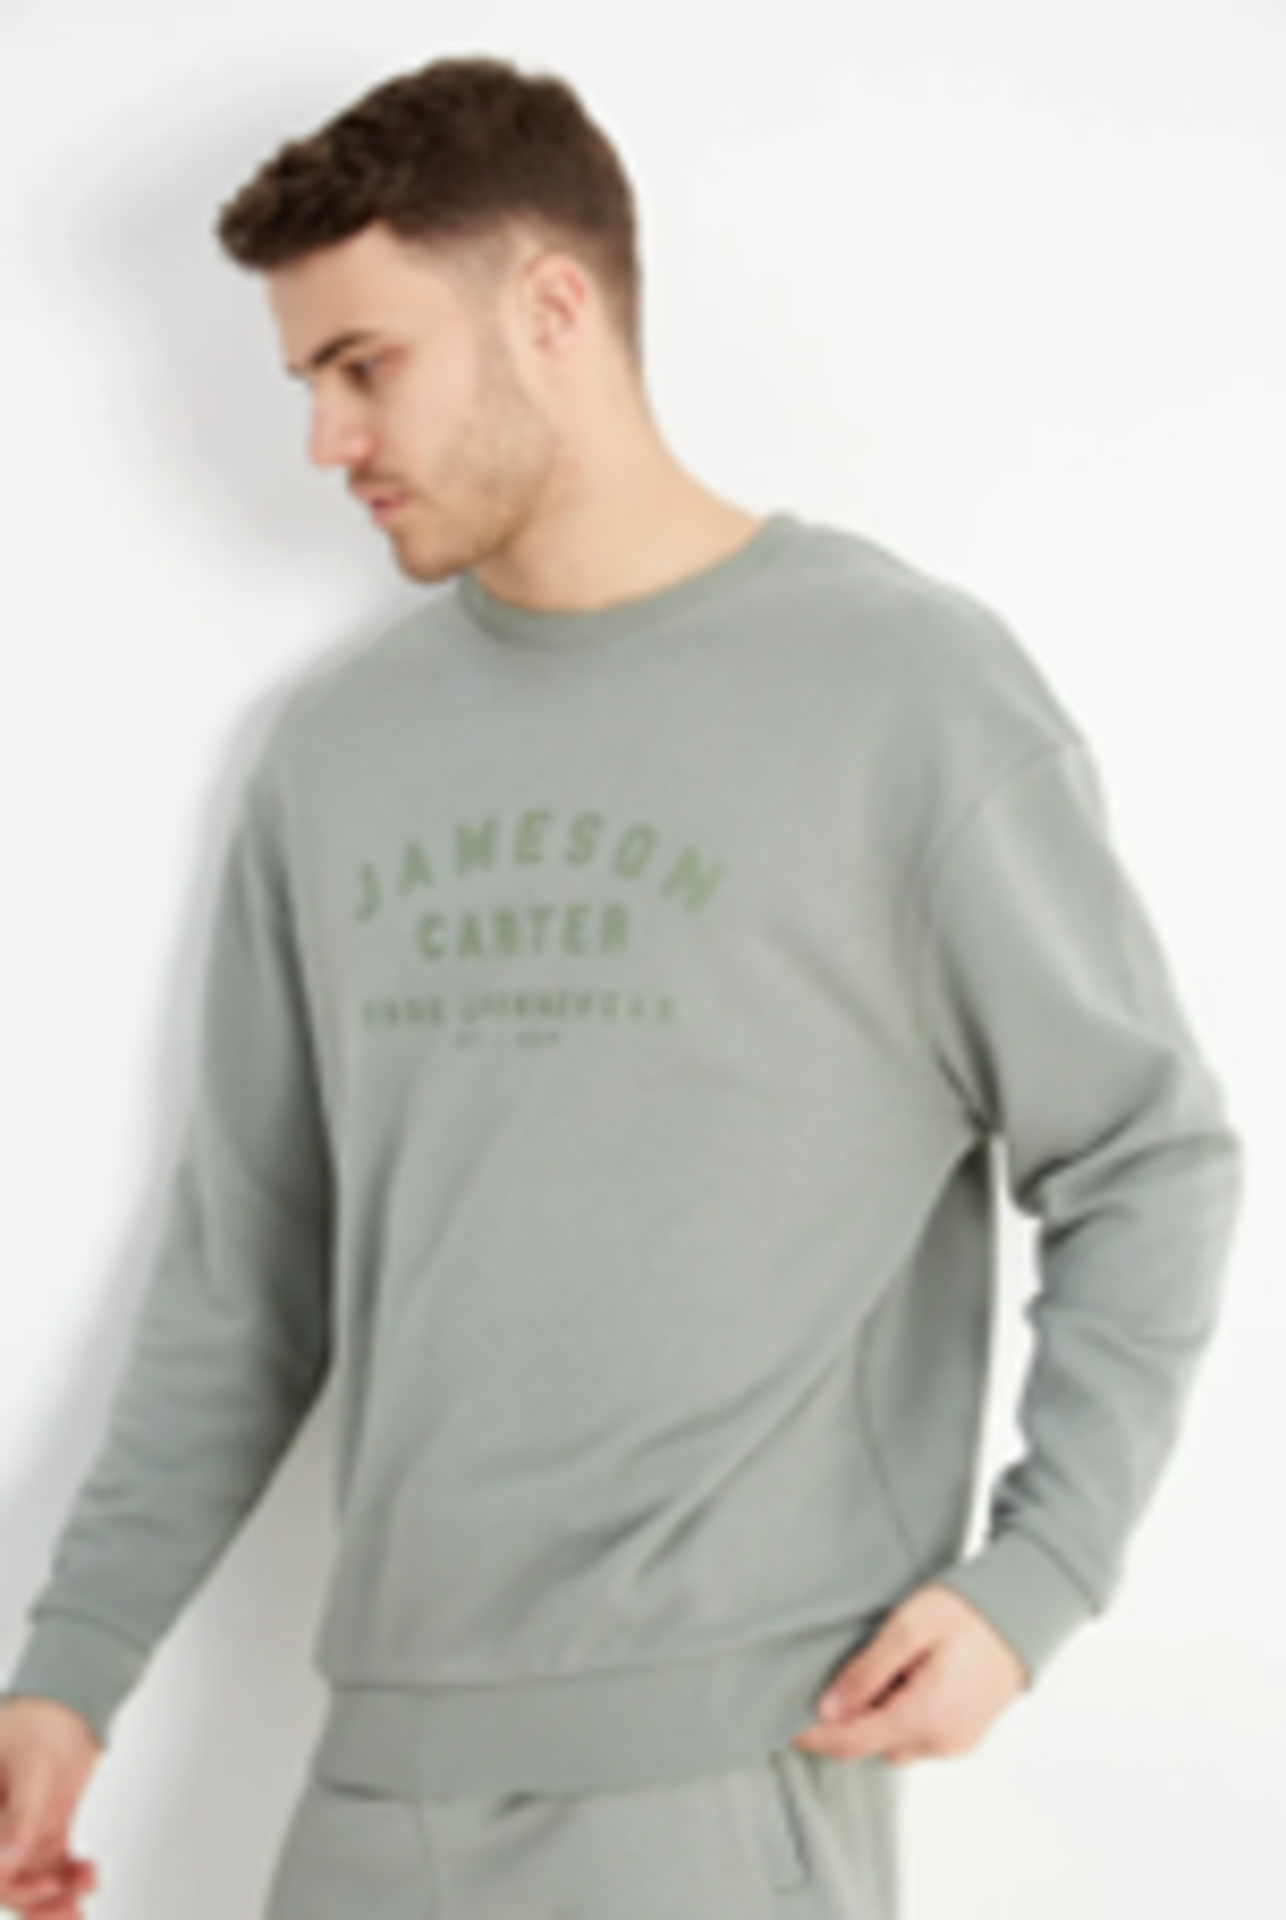 20 x NEW MIXED ITEMS OF JAMESON CARTER STOCK. TO INCLUDE ITEMS SUCH AS: JACKETS, TRACKSUITS, JOGGING - Image 9 of 12